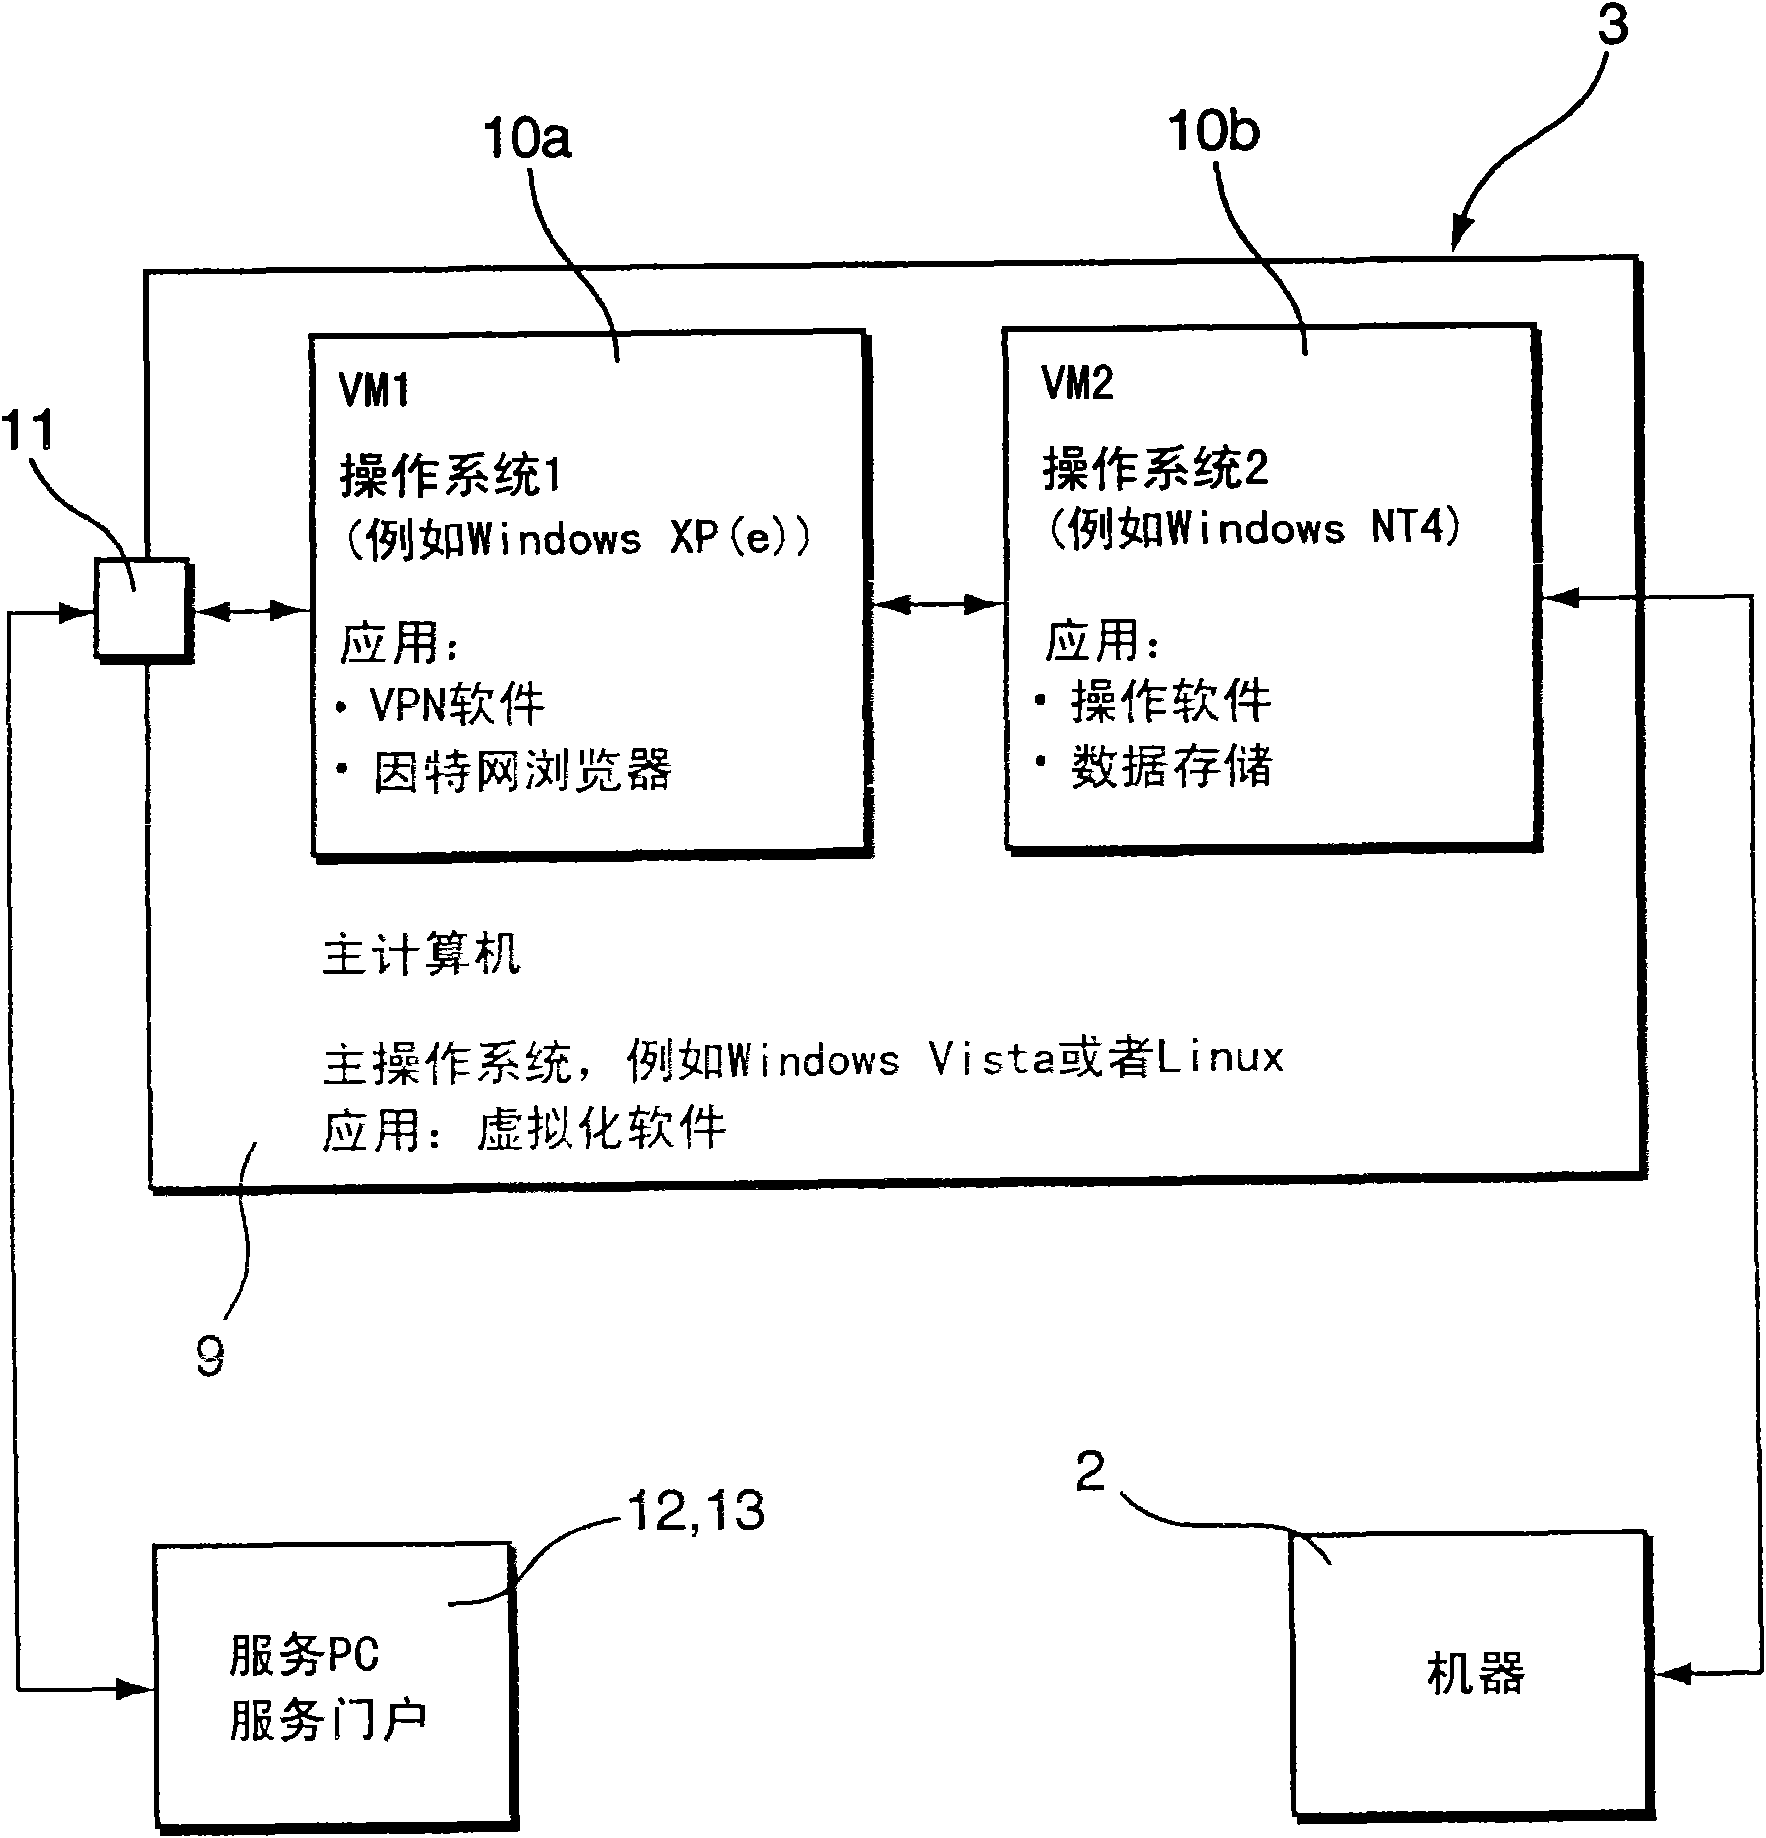 Apparatus for controlling a machine, and remote communication system